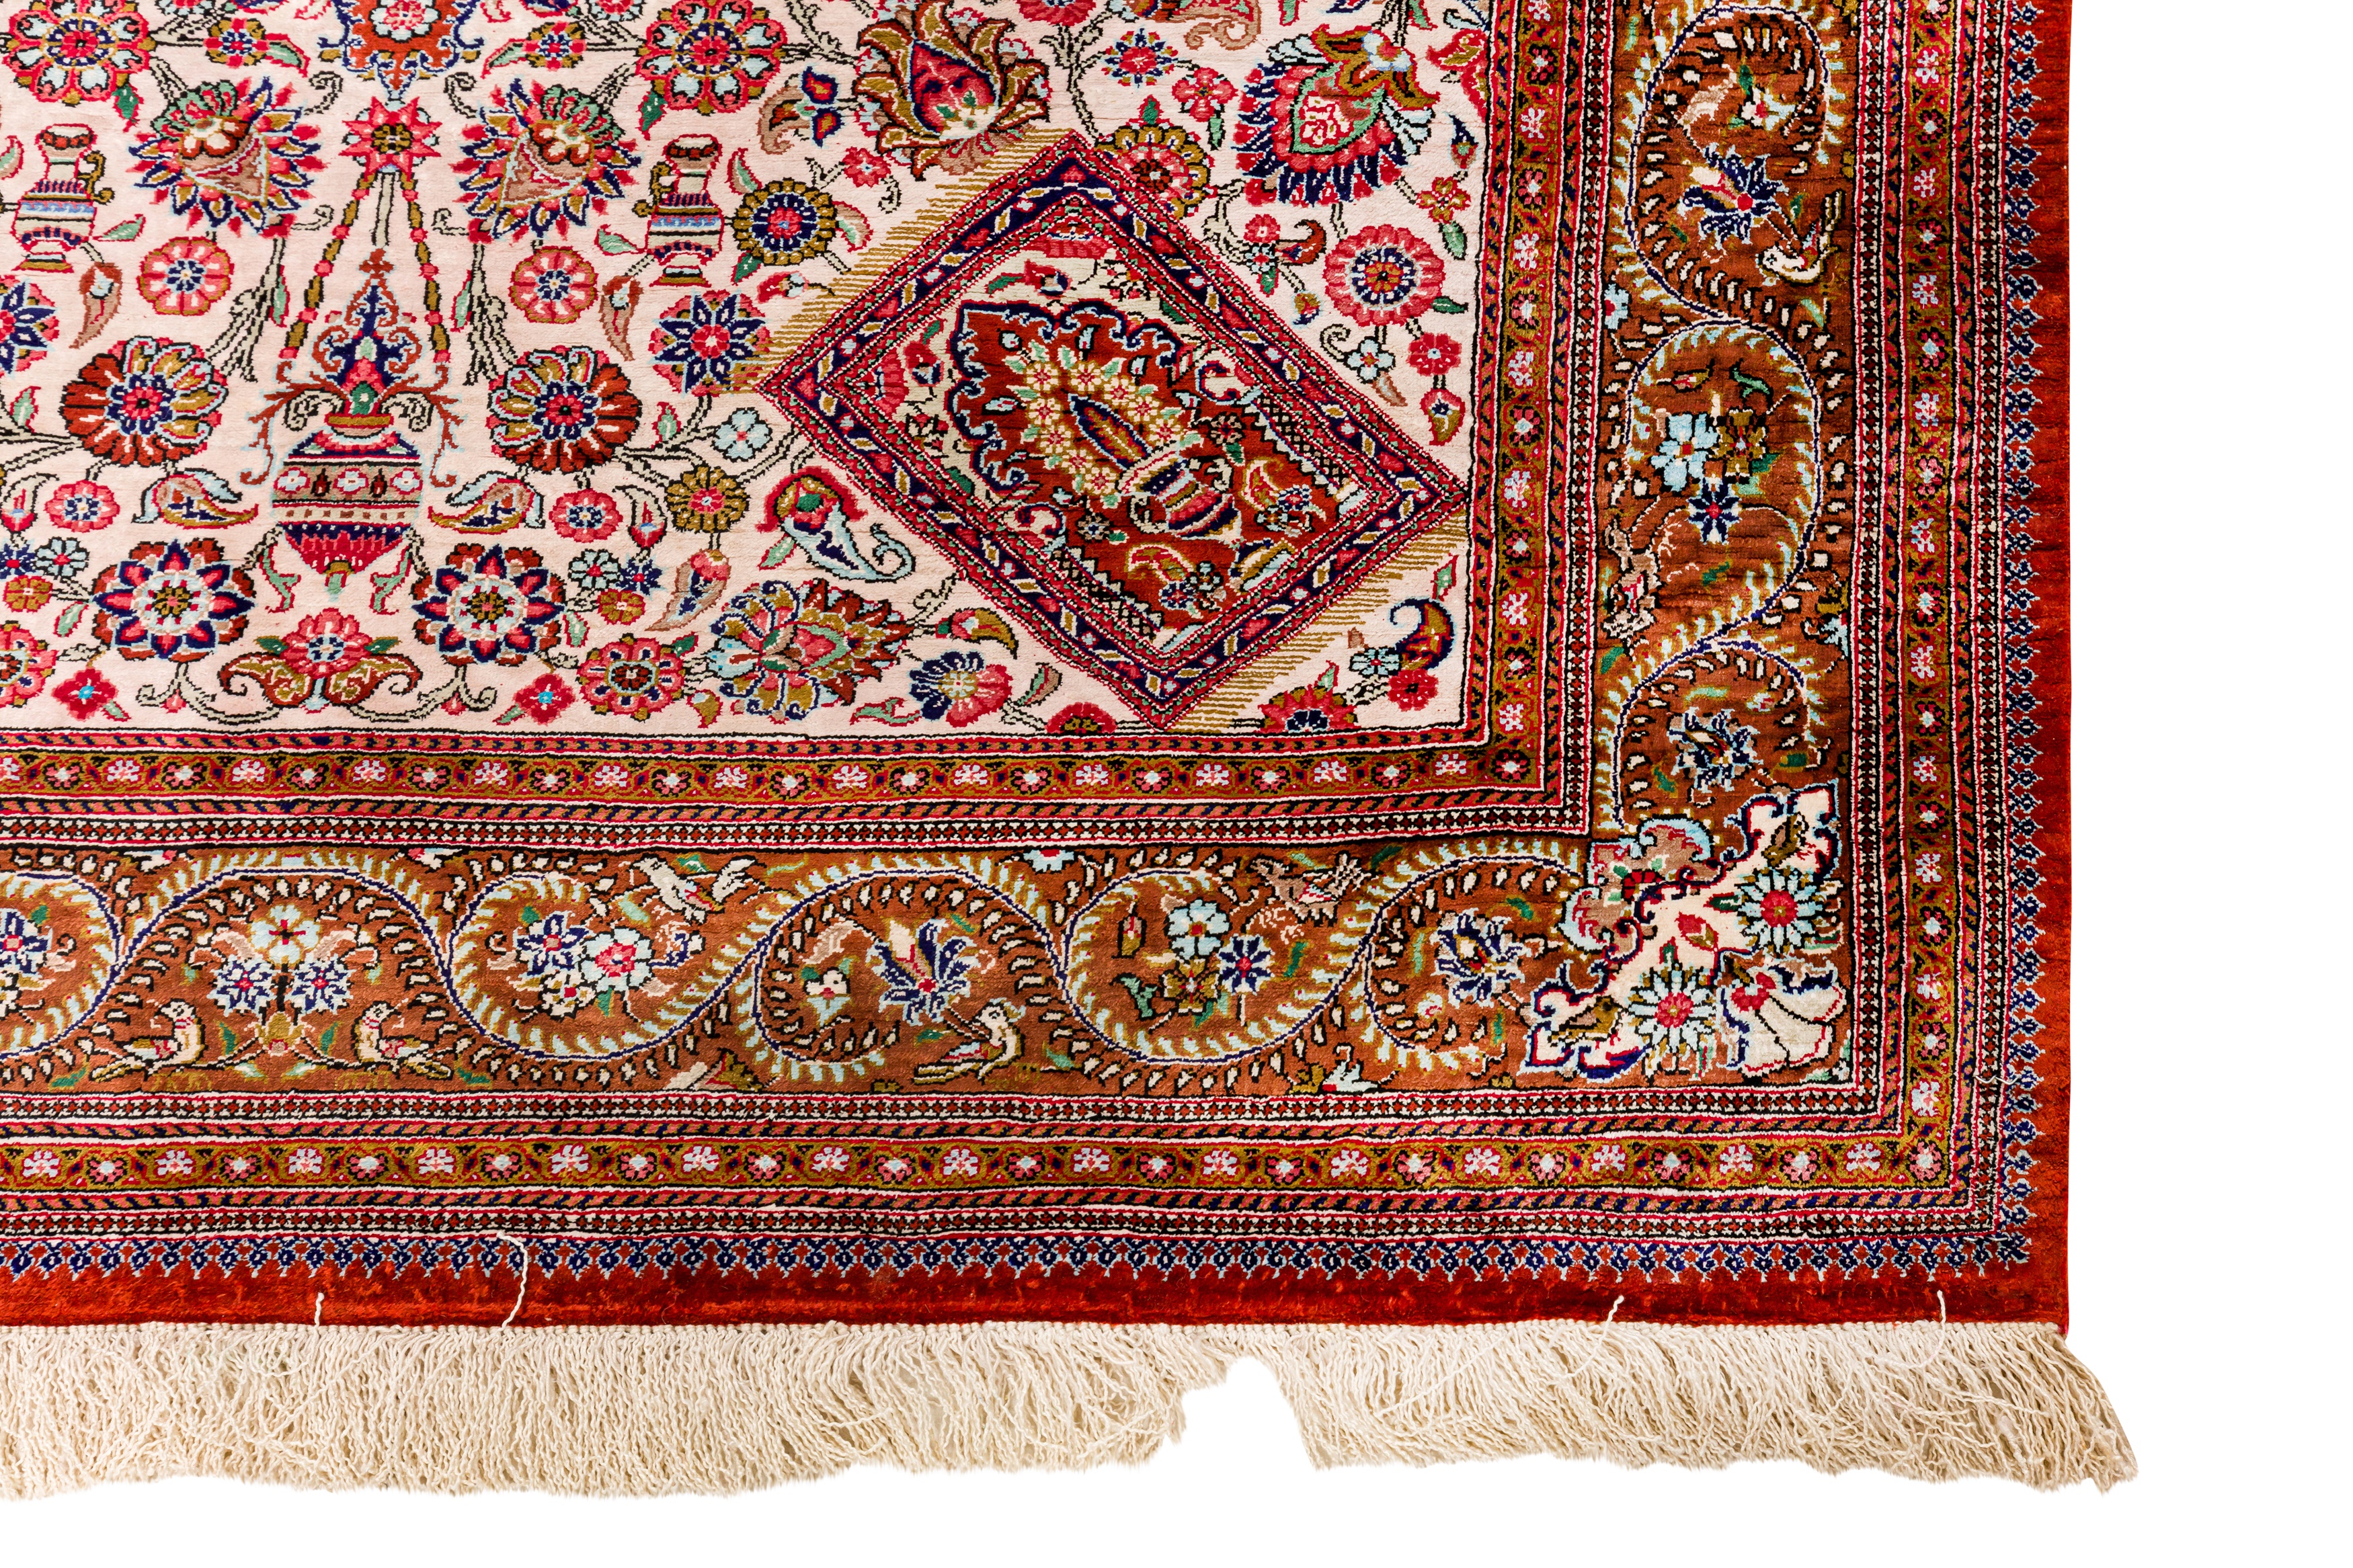 AN EXTREMELY FINE SIGNED SILK QUM RUG, CENTRAL PERSIA - Image 8 of 9